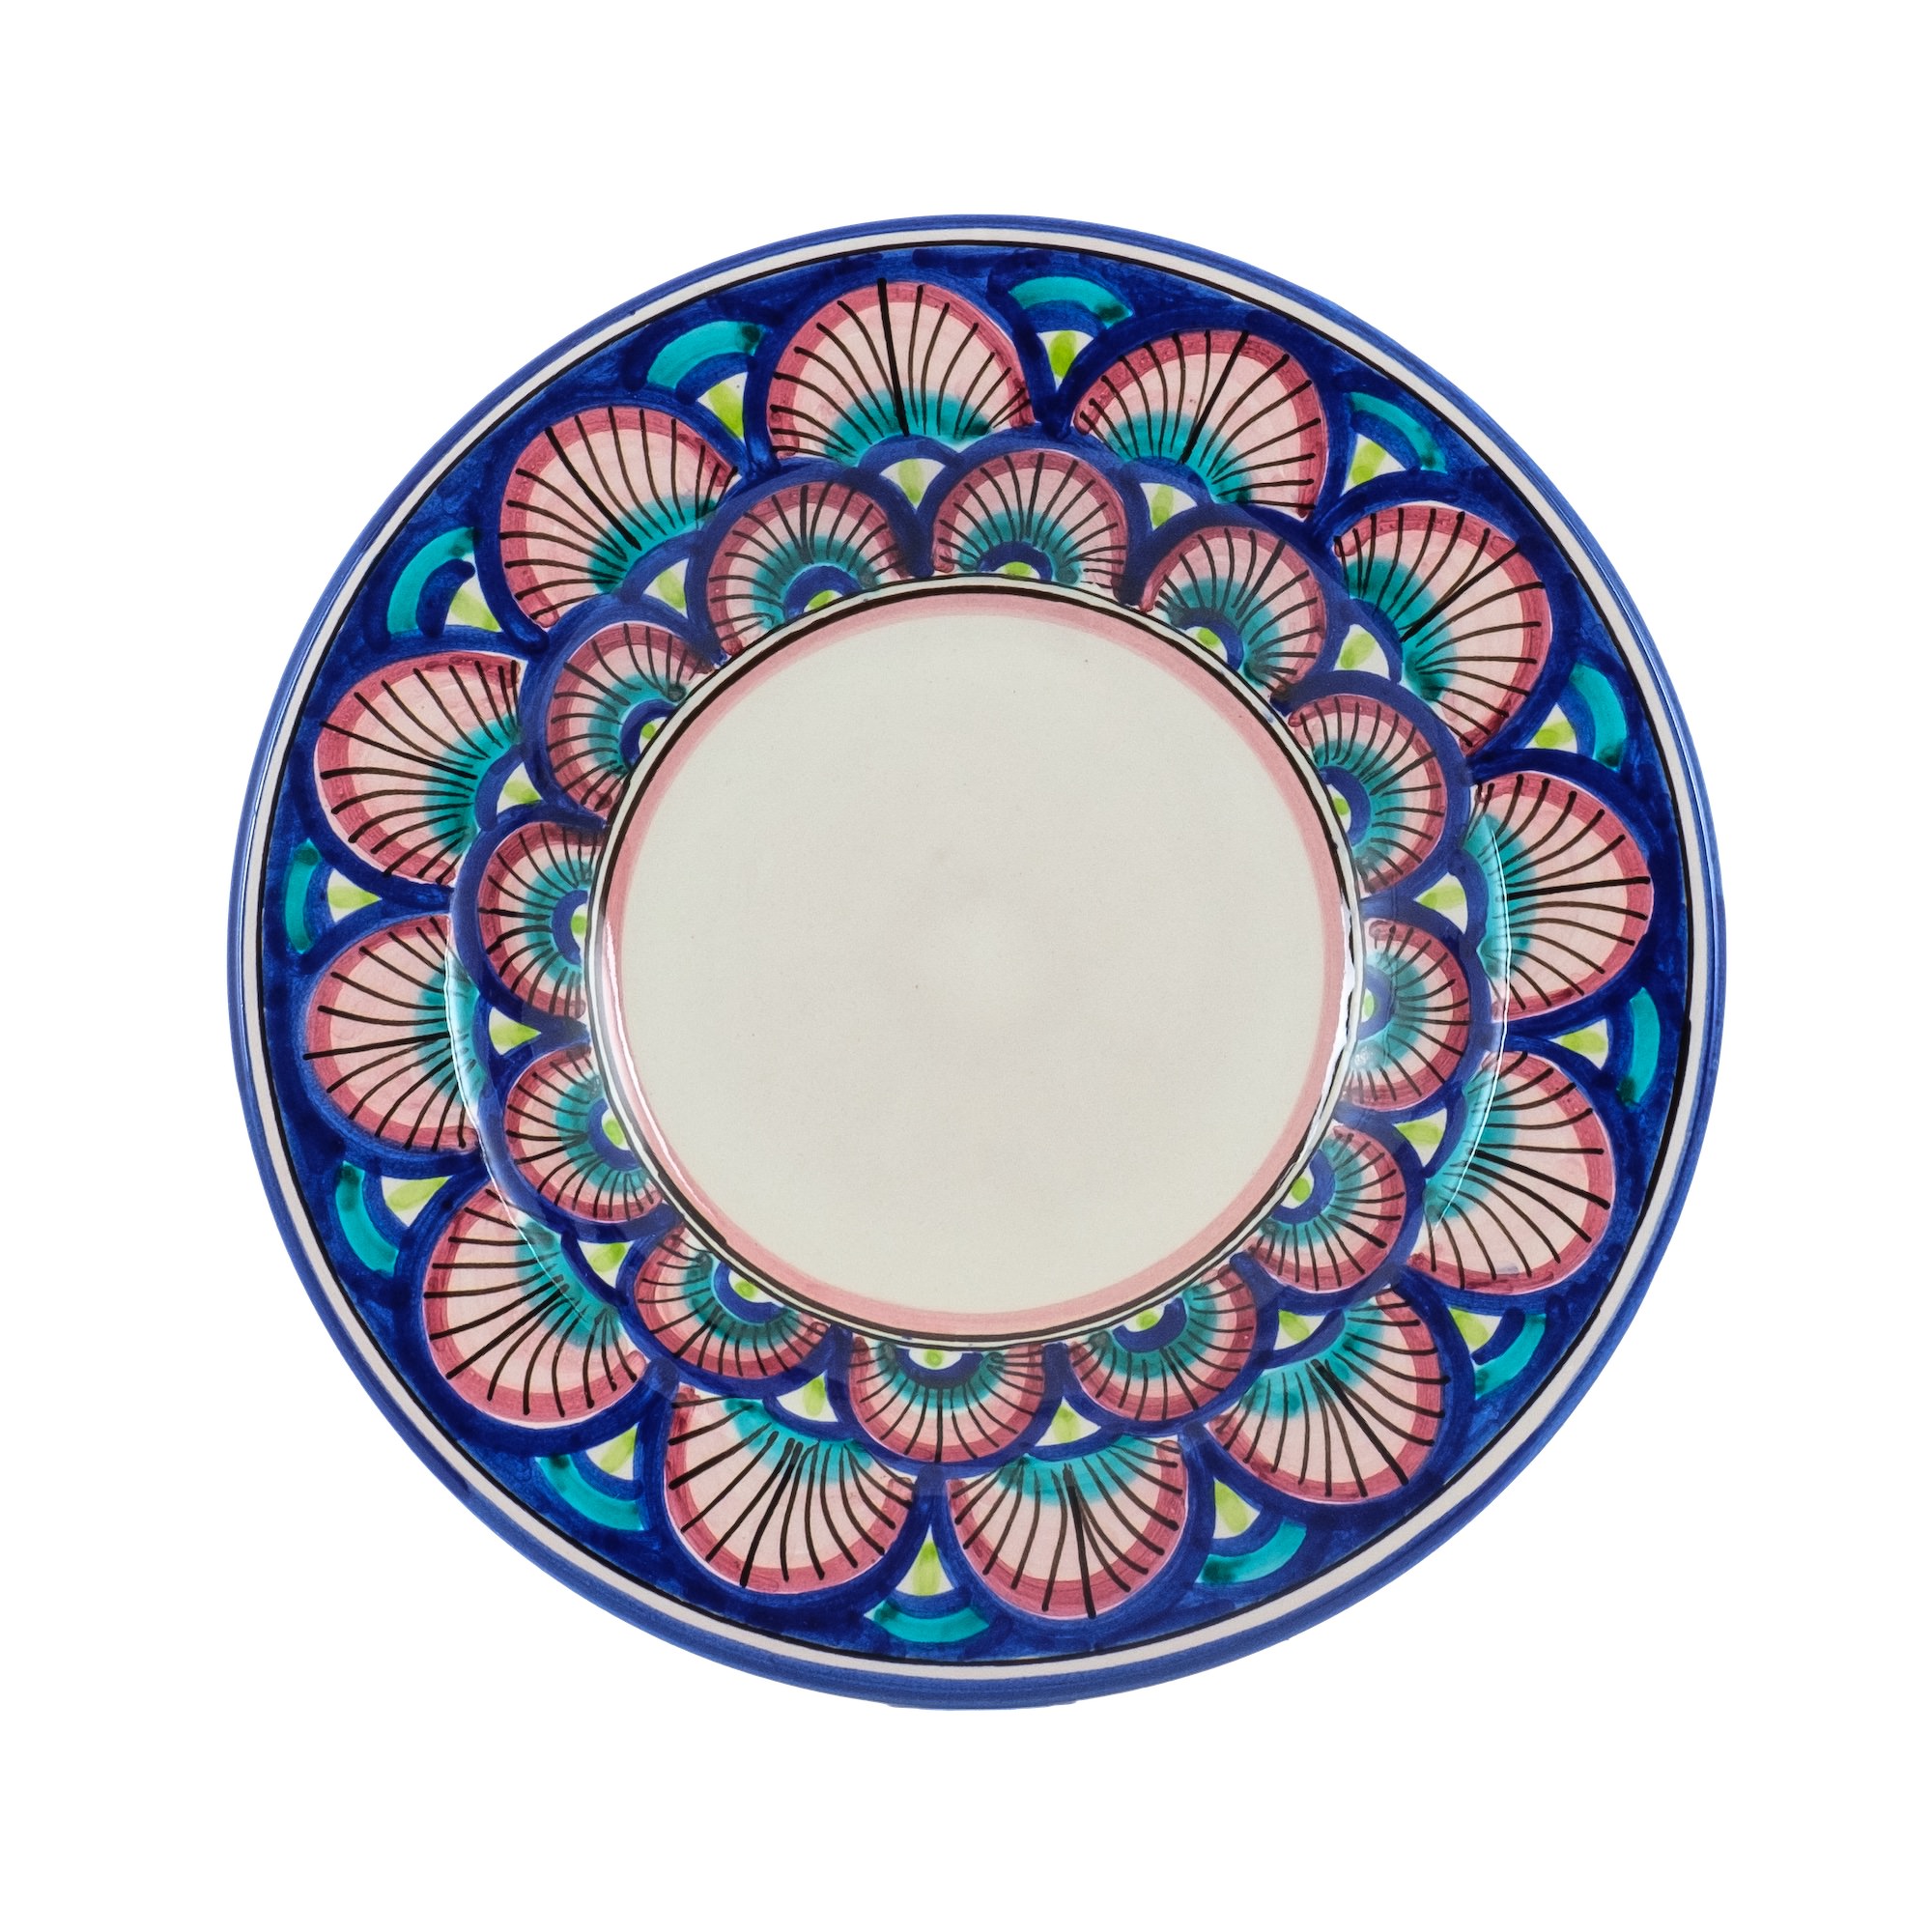 Collections dishes Ego the pink of Mozia Caltagirone - Sicilia